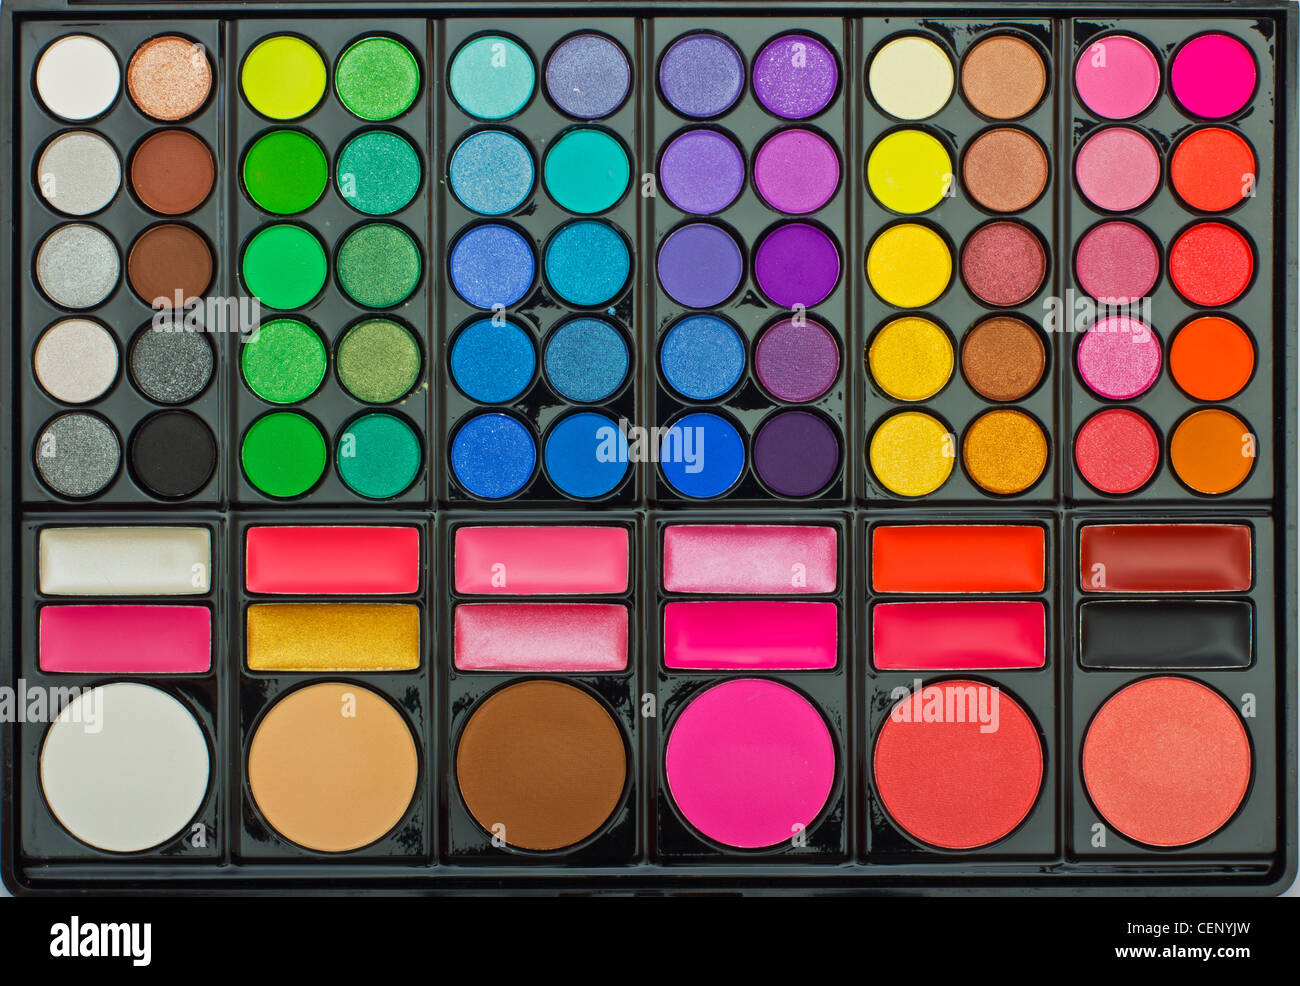 Makeup colorful eyeshadow palettes as background Stock Photo